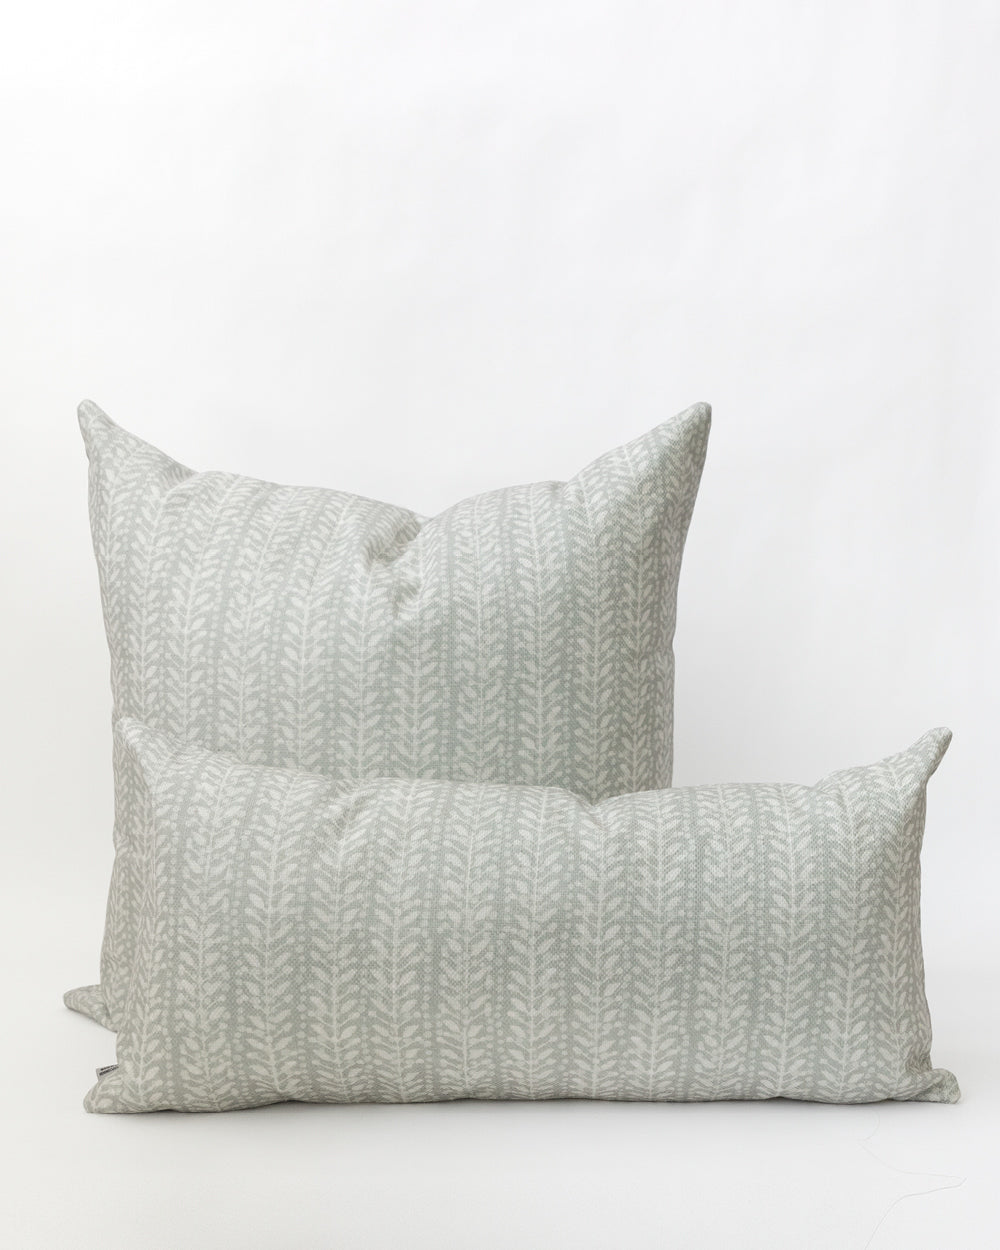 Two pillows with a subtle white floral/vine stripe on a misty grey-blue background